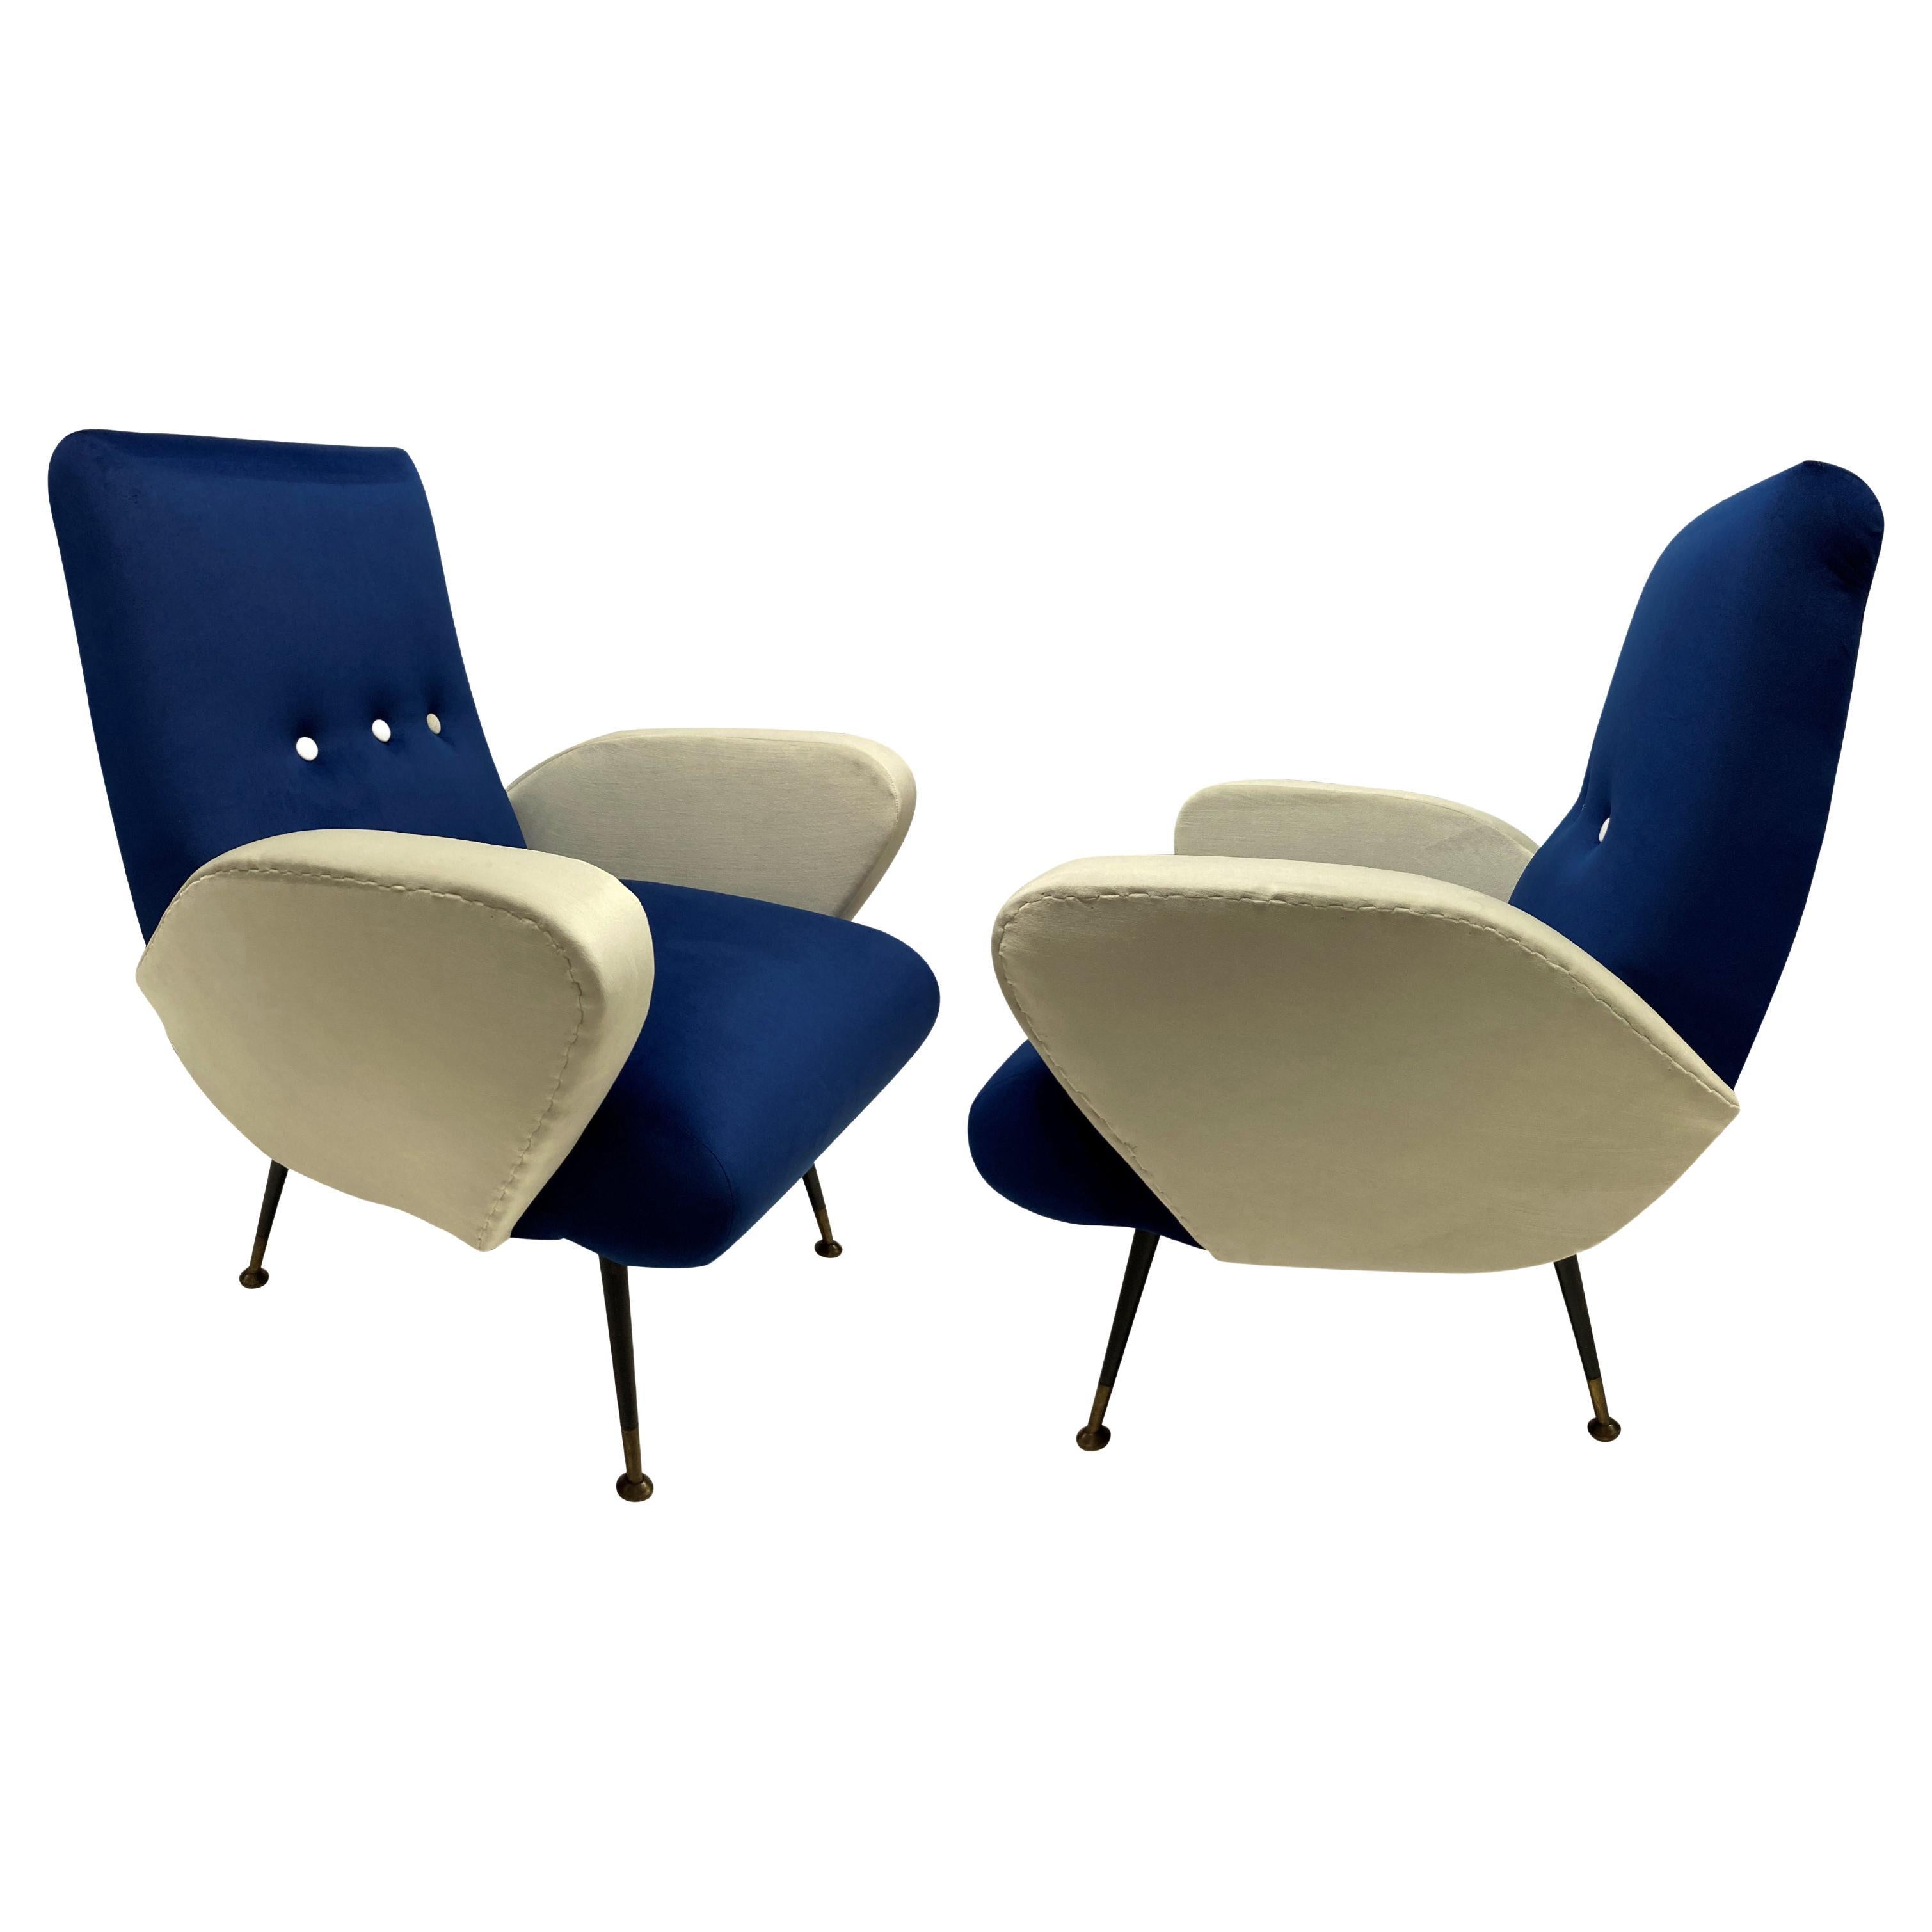 Pair of Midcentury Armchairs by Nino Zoncada For Sale